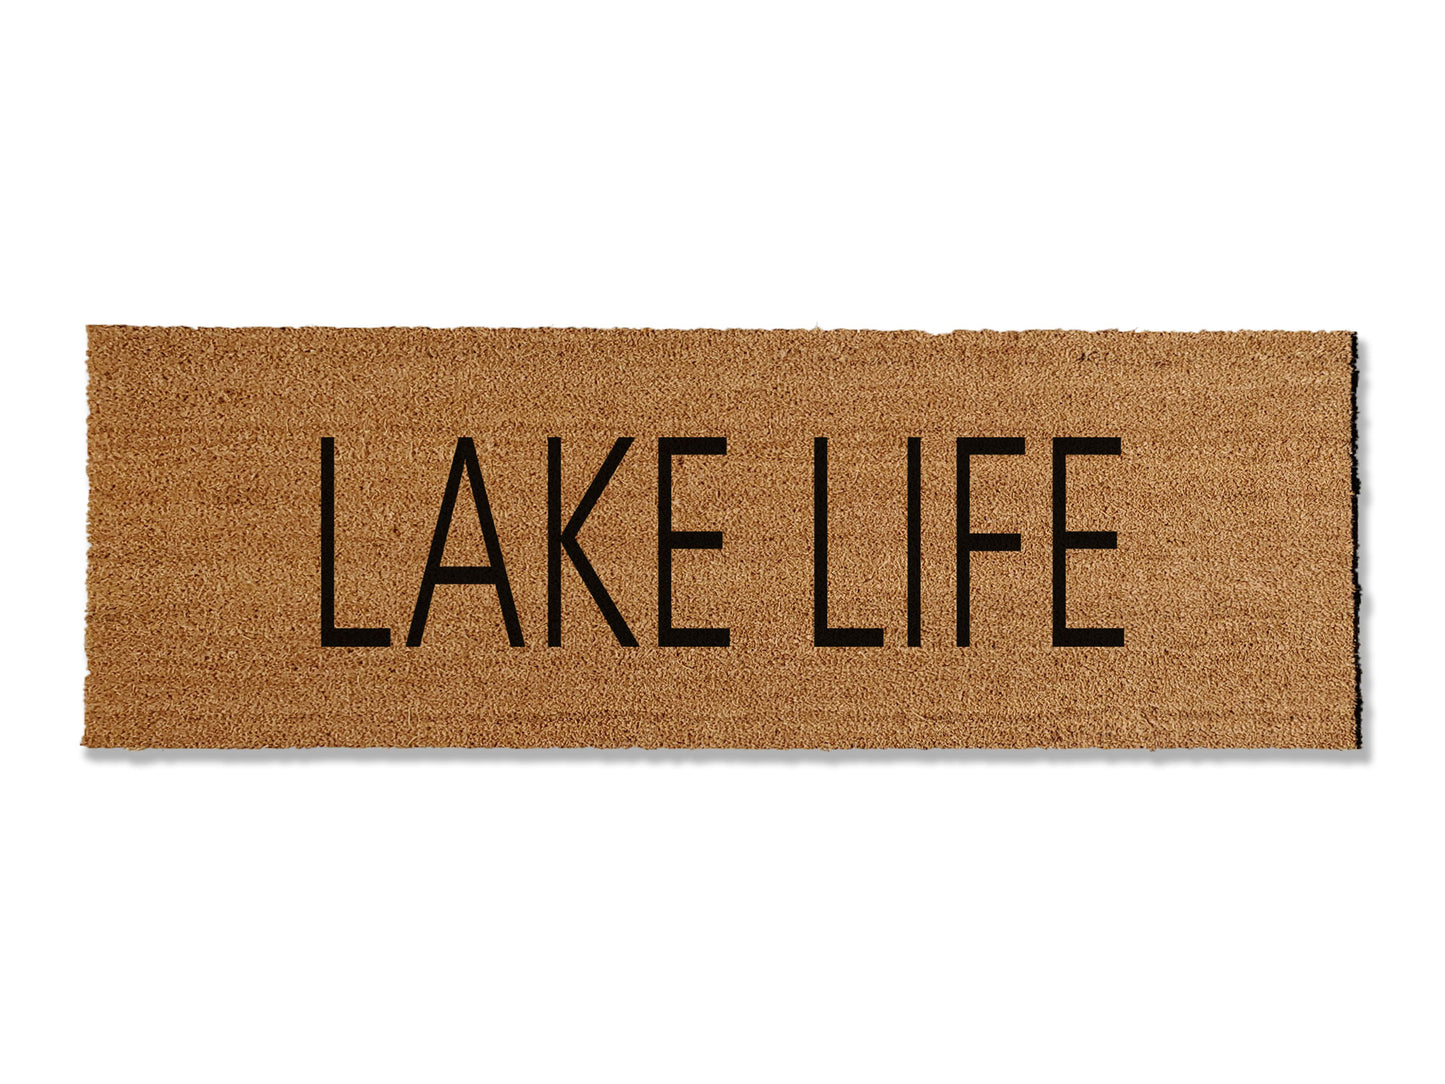 Welcome guests to the perfect lake house with our themed doormat that reads 'LAKE LIFE.' Available in multiple sizes, this doormat combines style and functionality, effectively trapping dirt to keep your lake retreat clean and inviting.